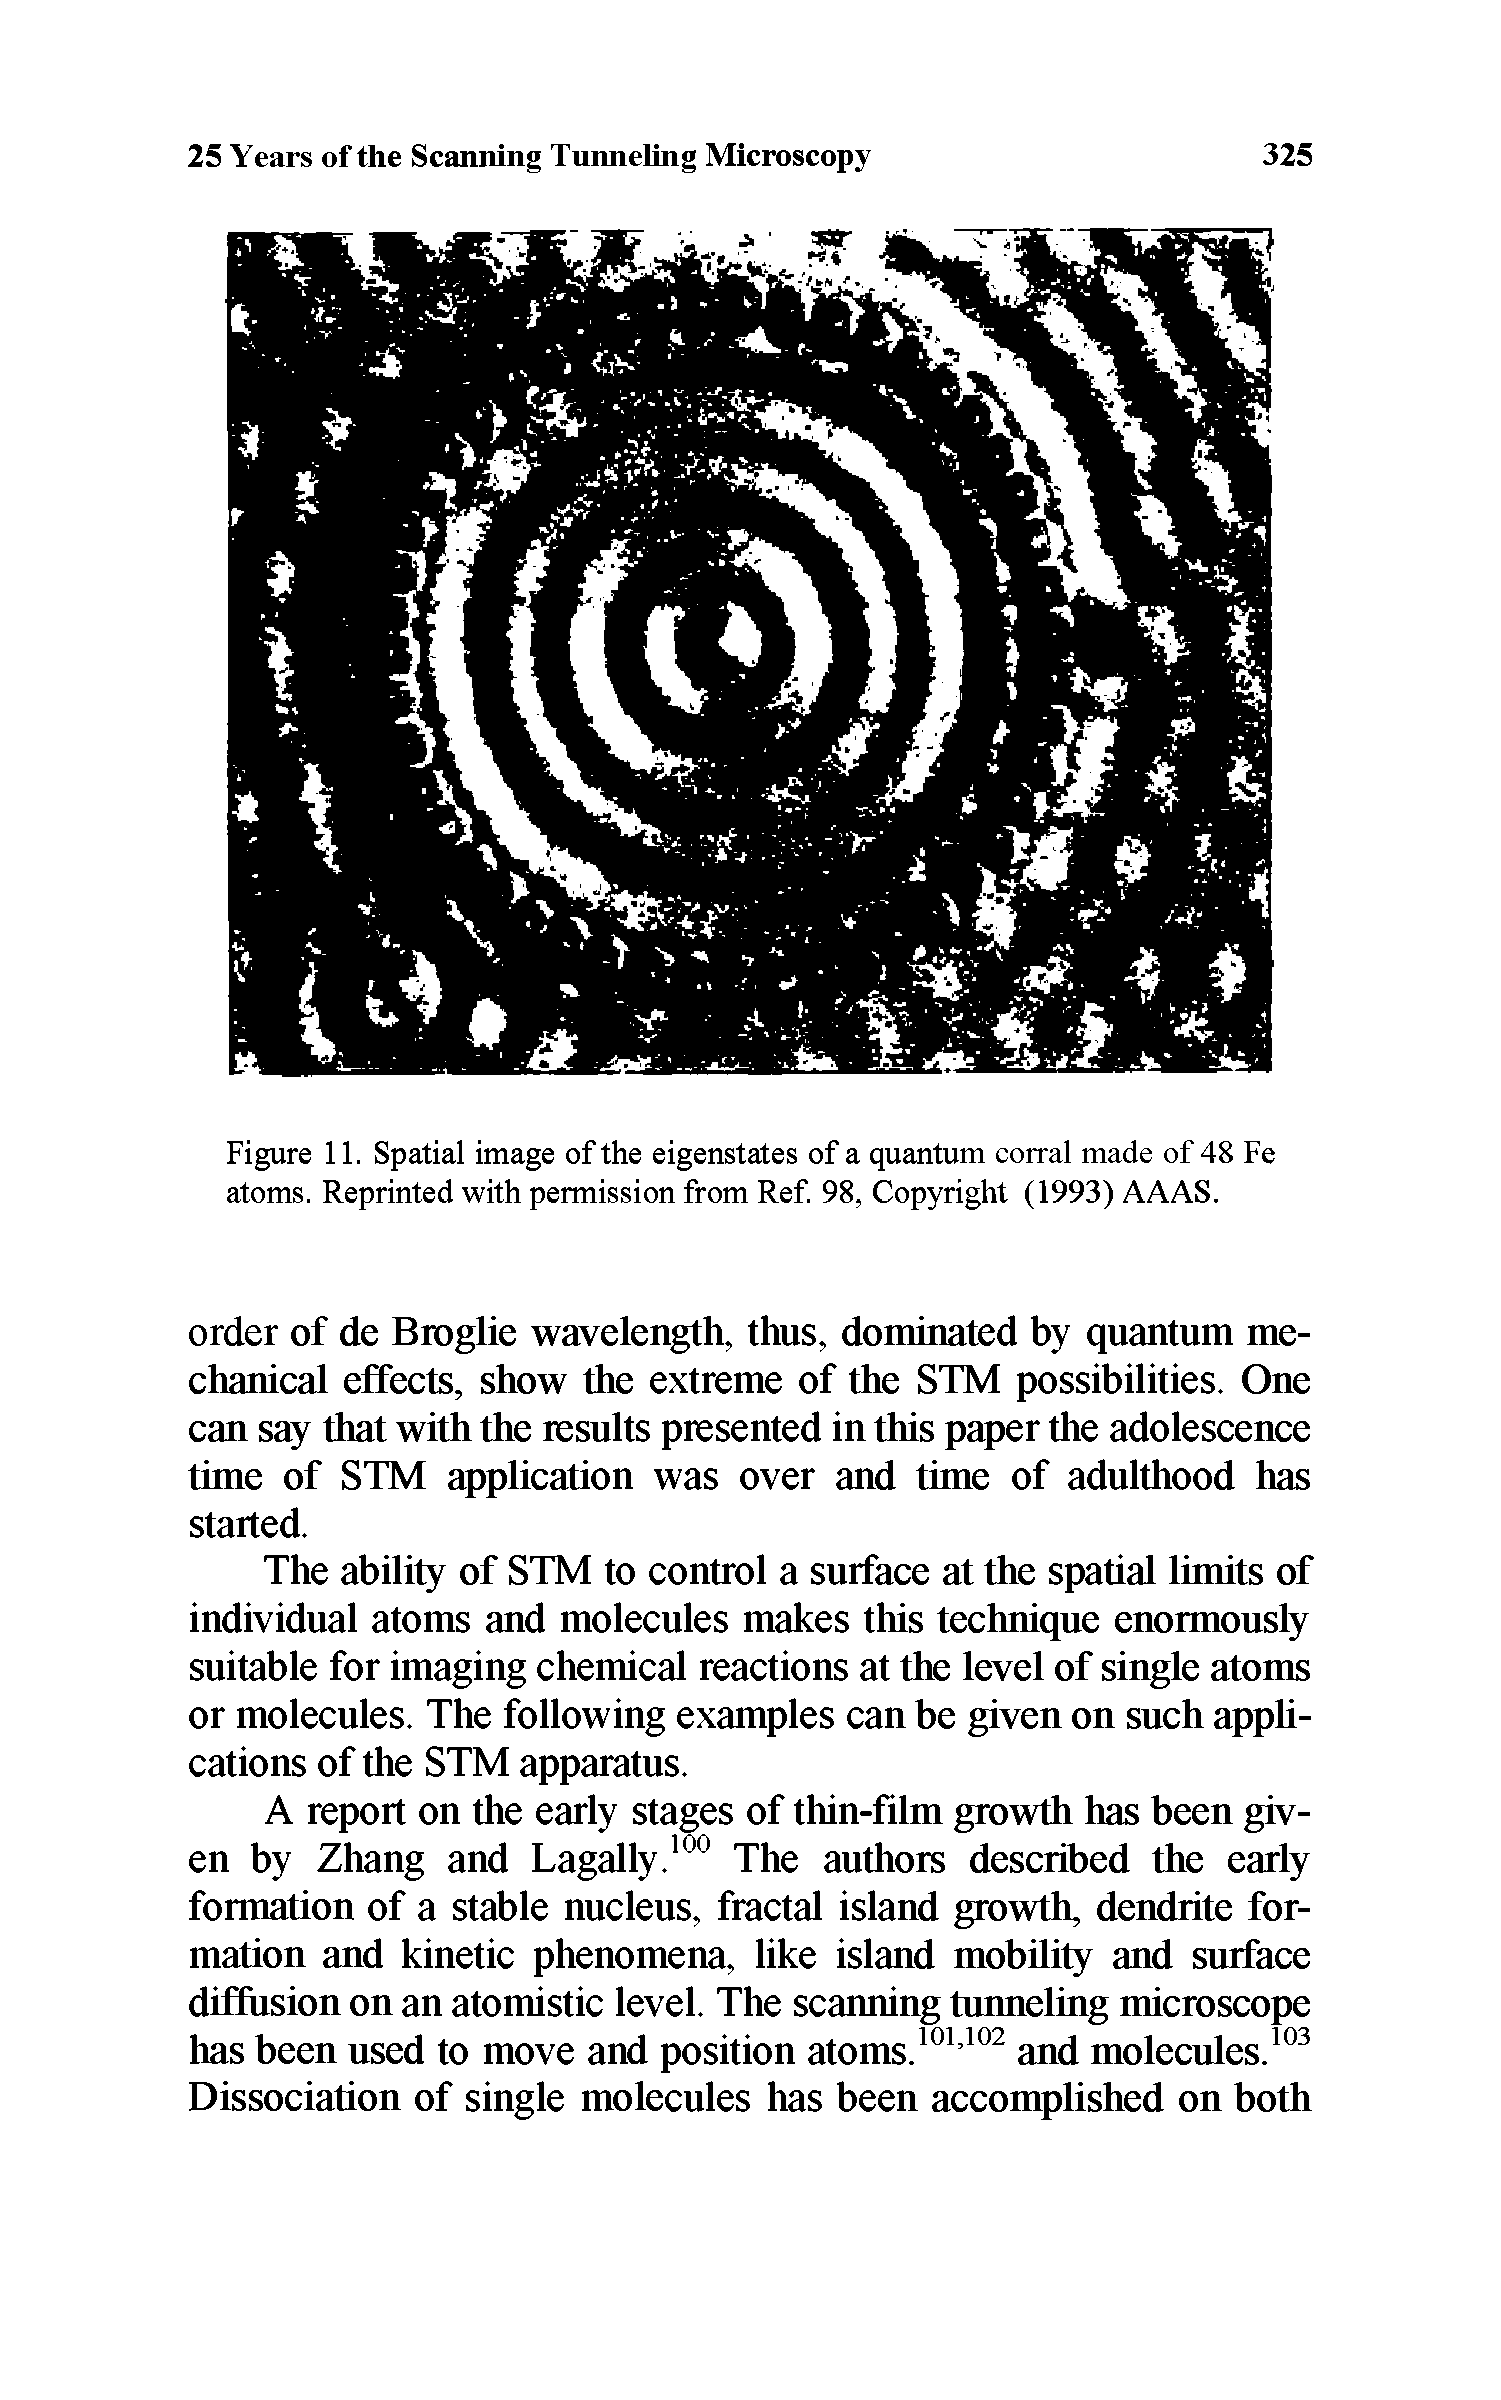 Figure 11. Spatial image of the eigenstates of a quantum corral made of 48 Fe atoms. Reprinted with permission from Ref. 98. Copyright (1993) AAAS.